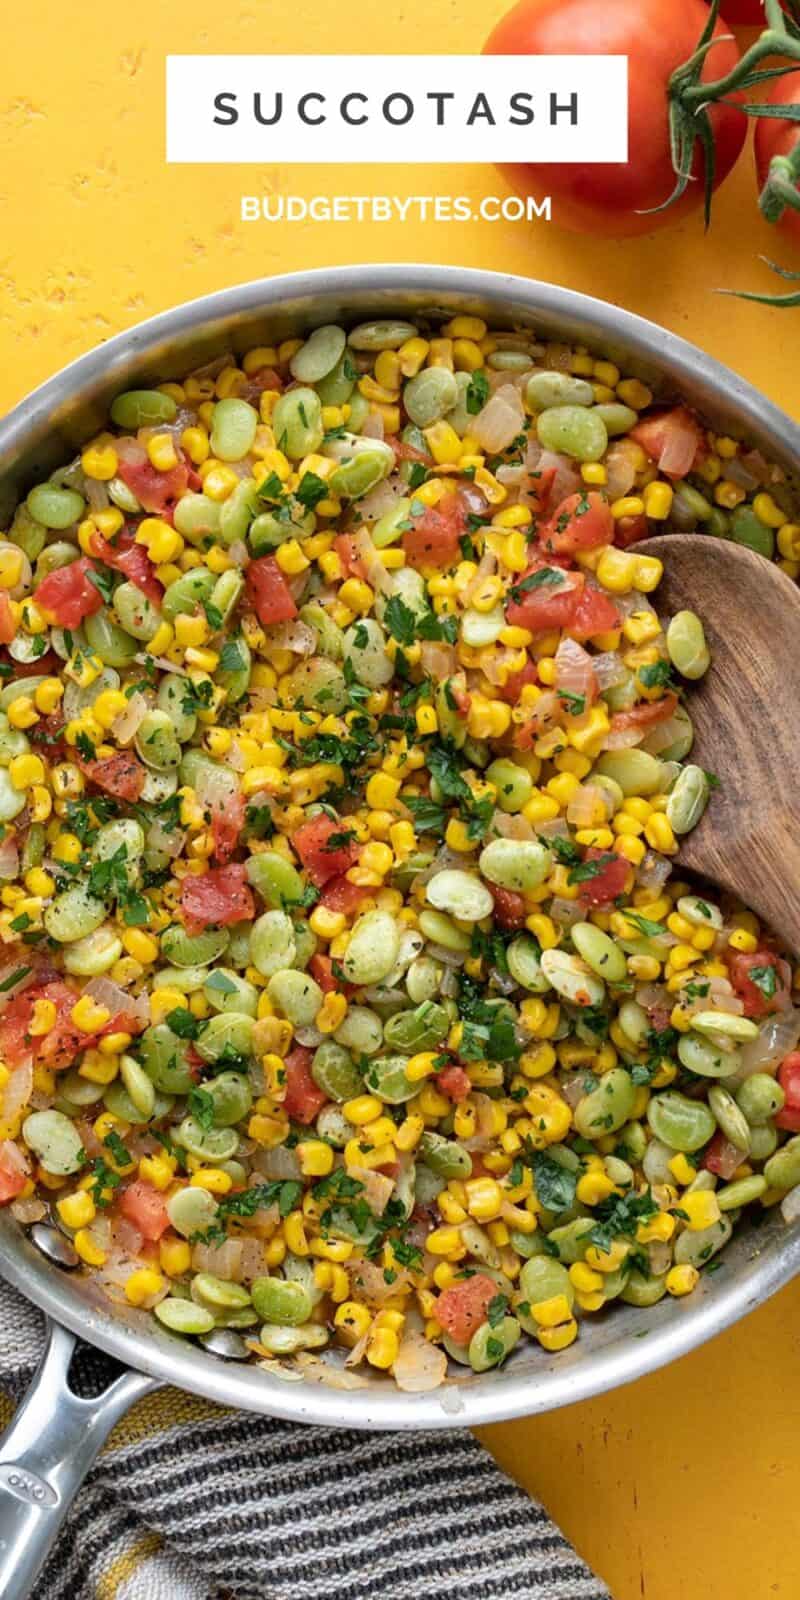 Overhead view of a skillet full of succotash.